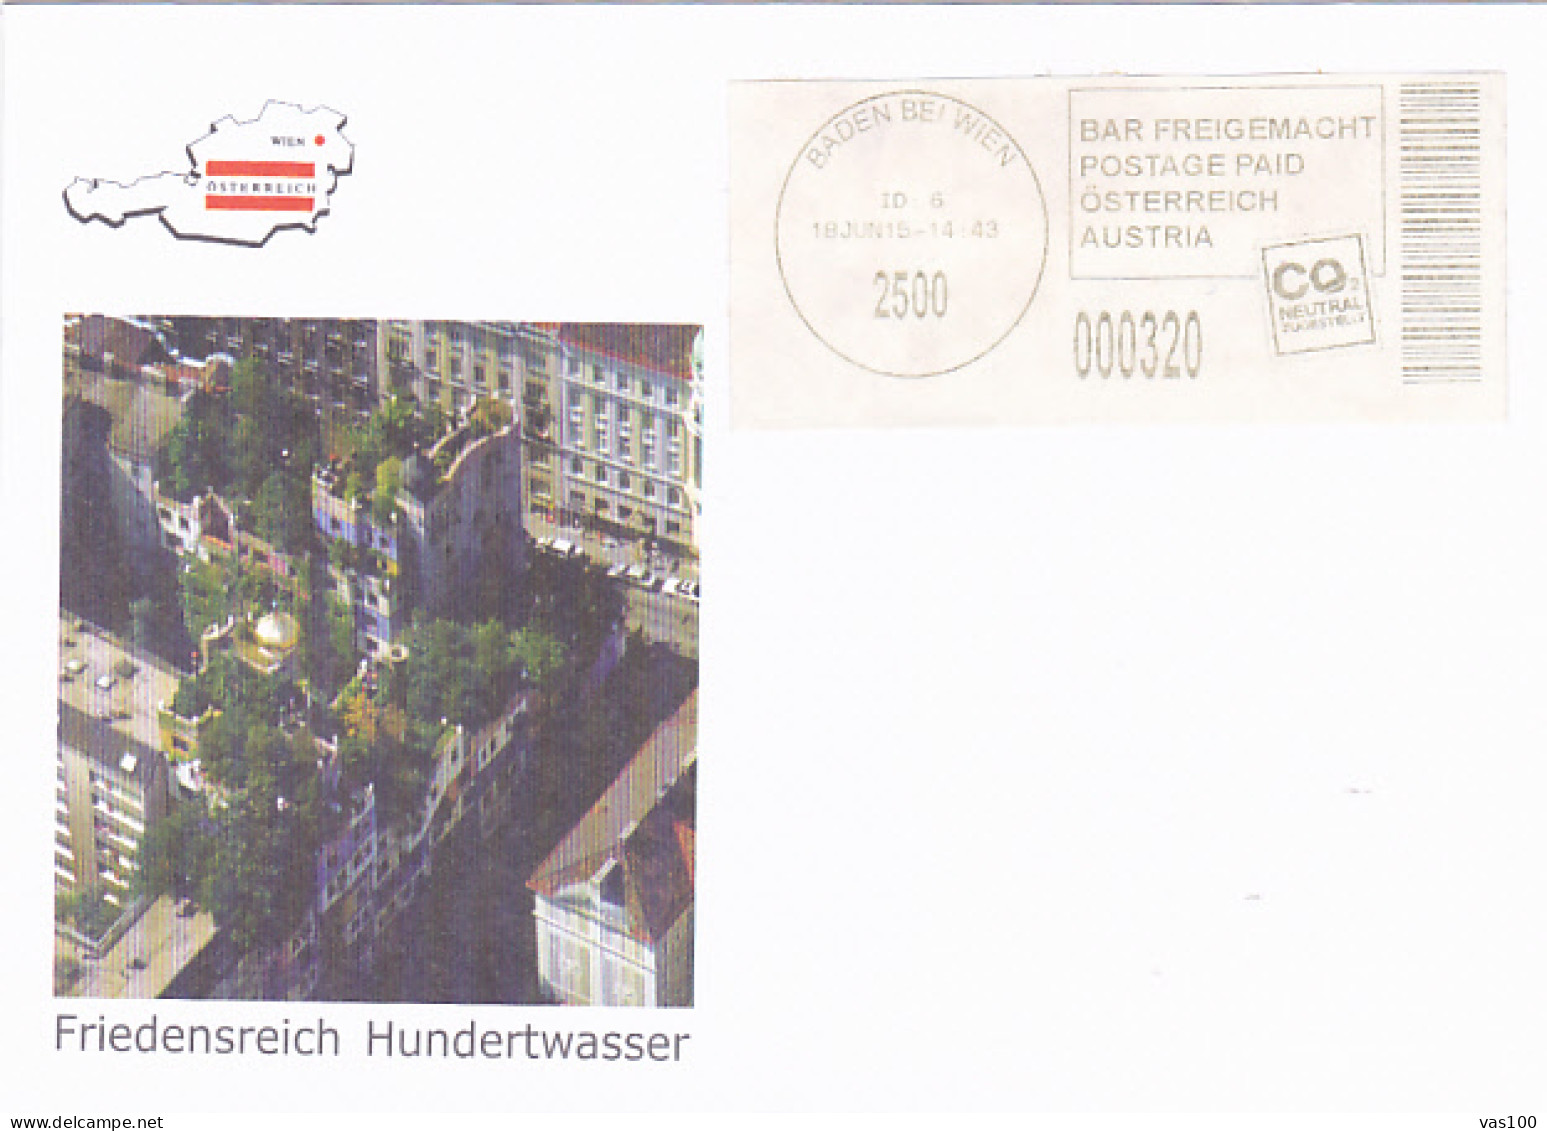 FRIEDENSREICH HUNDERTWASSER, ARCHITECT, POSTAGE PAID SPECIAL COVER, 2015, AUSTRIA - Covers & Documents